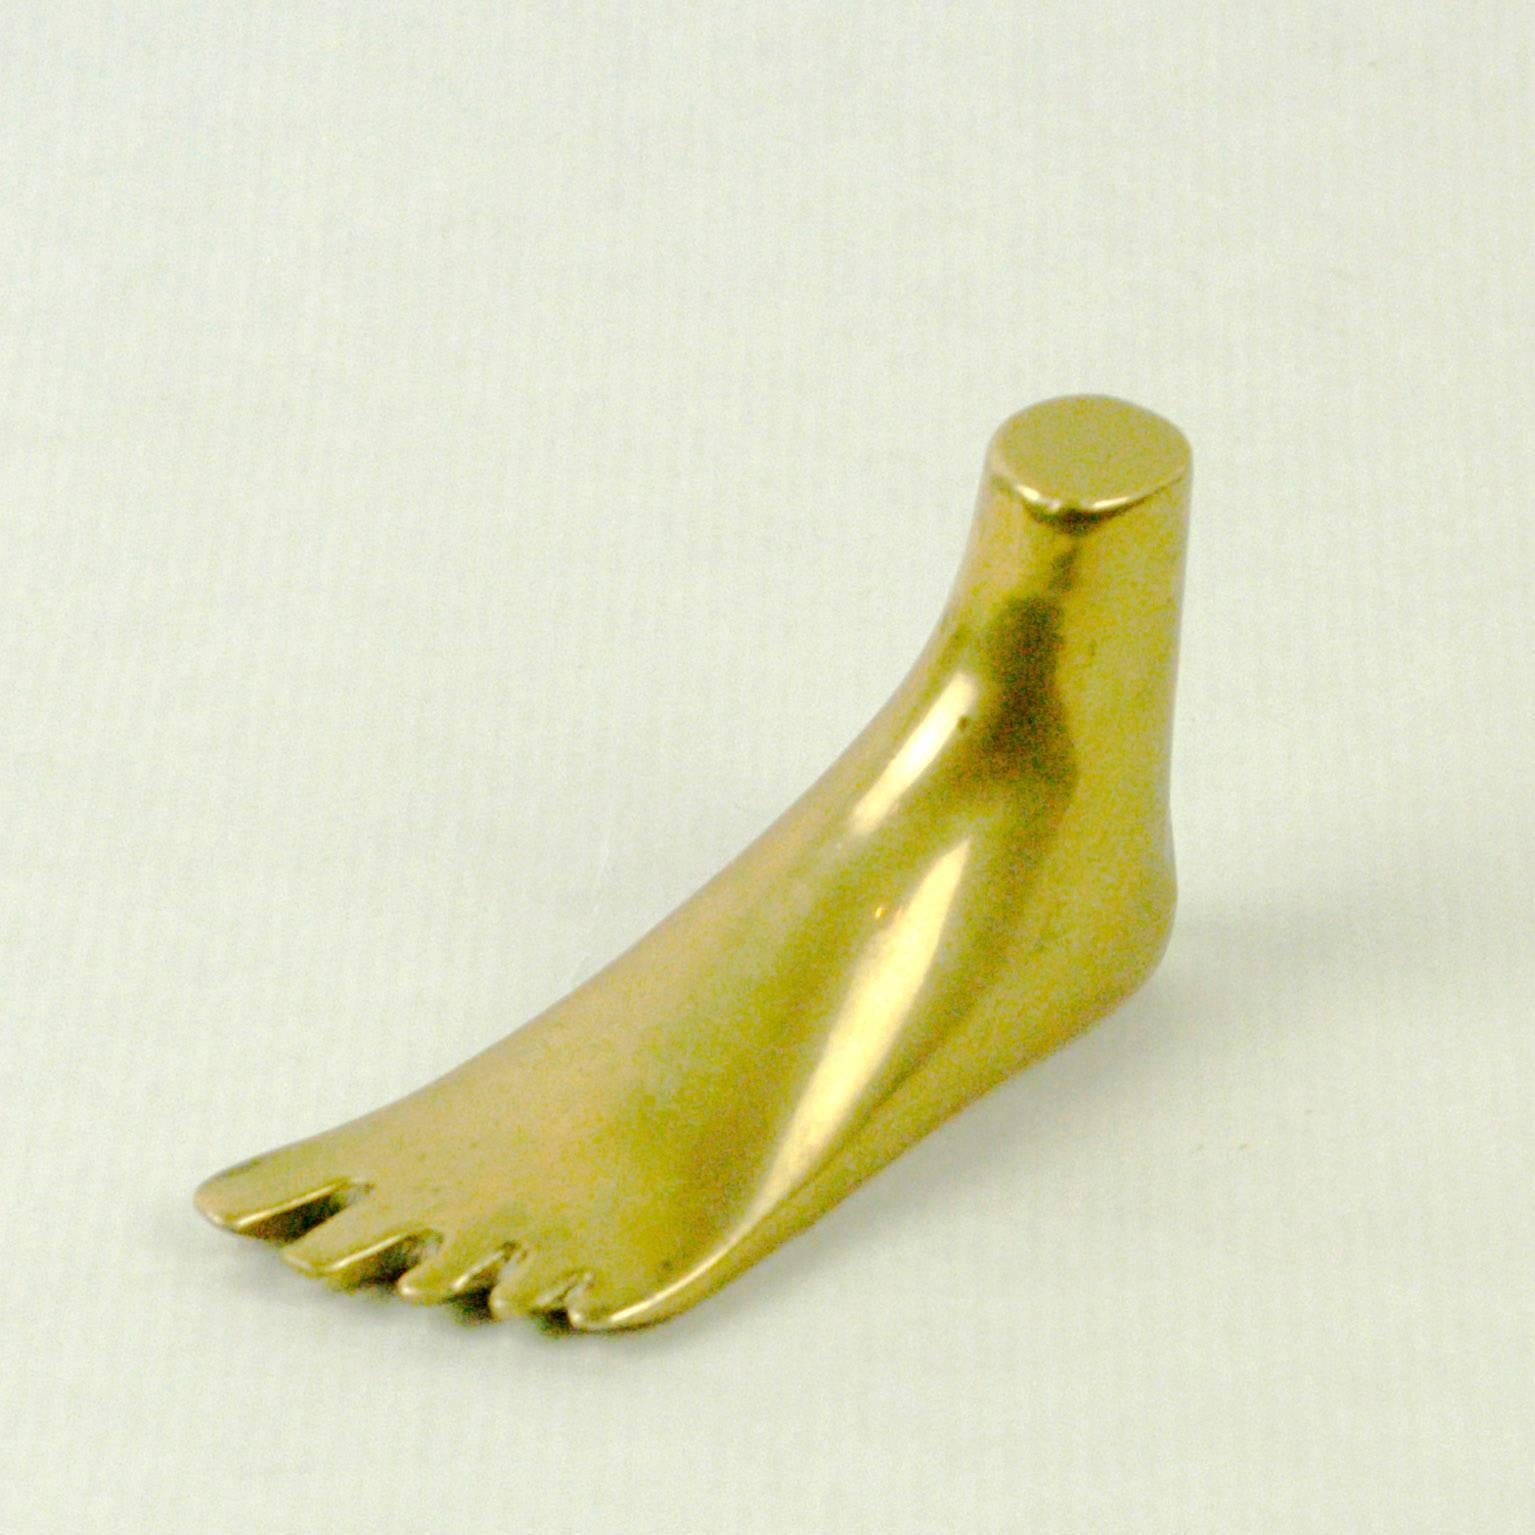 Austrian modernist paperweight in the shape of a foot by Carl Auböck.